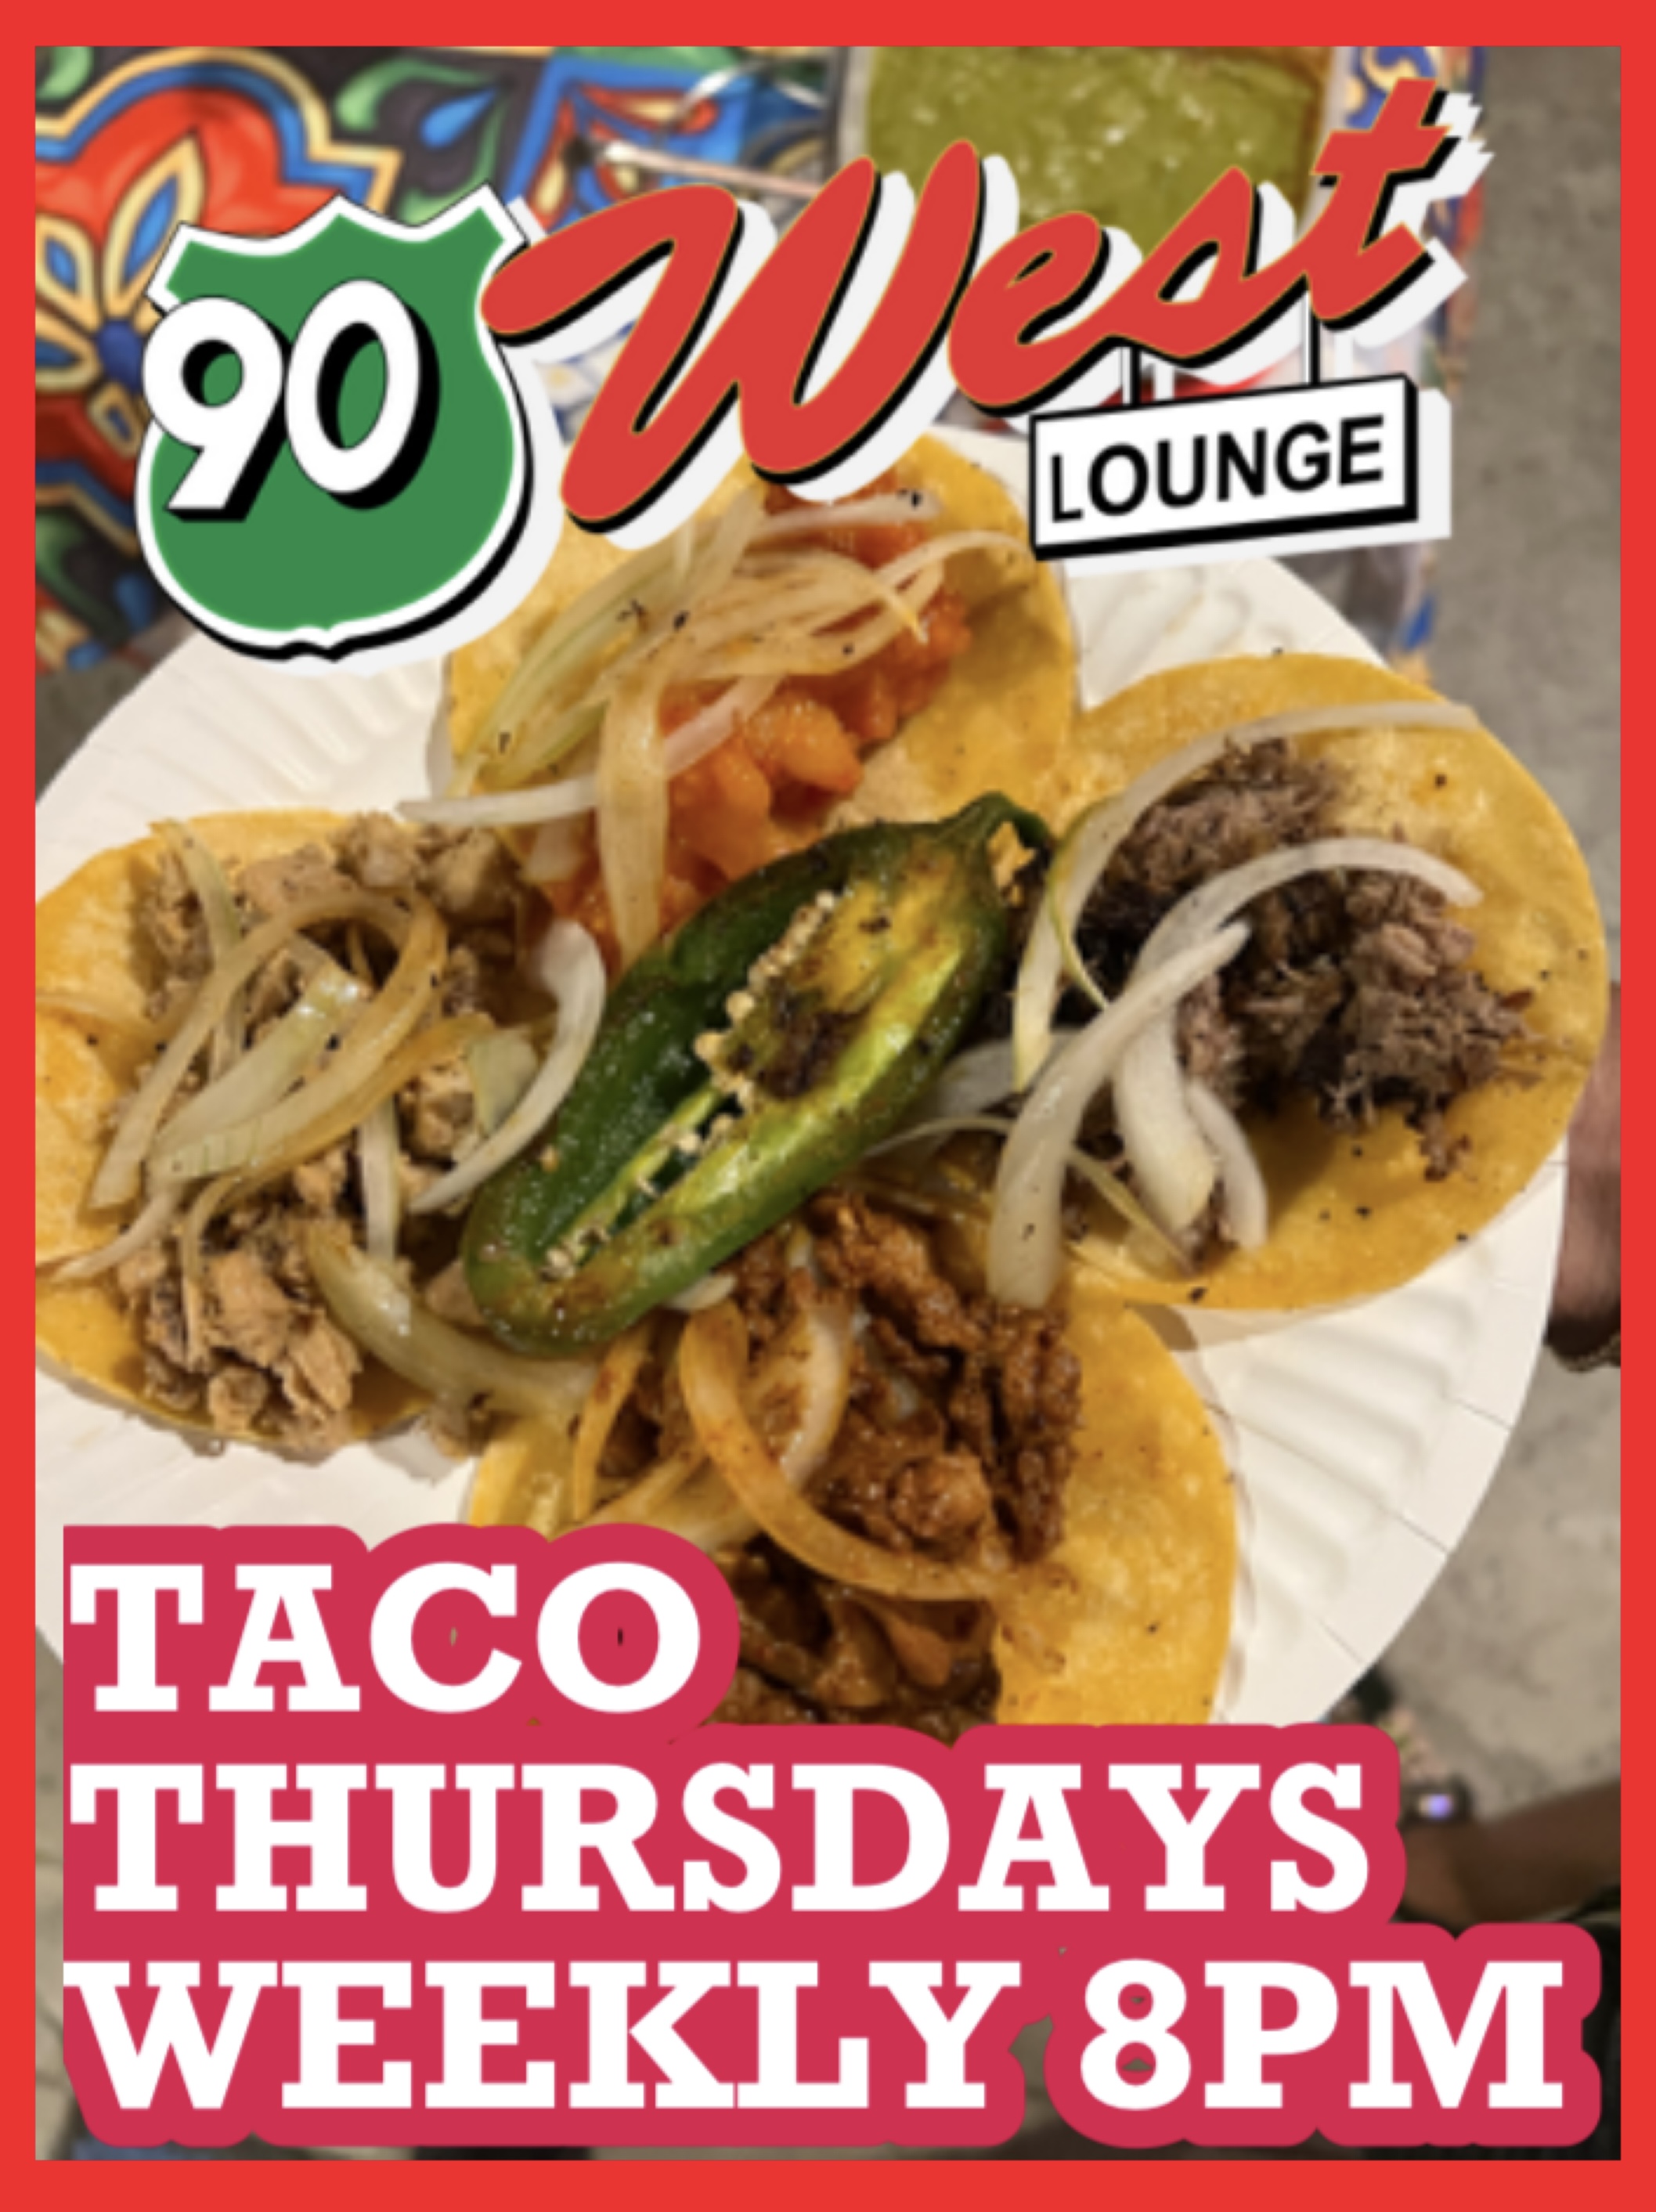 Ad with tacos that says Taco Thursday Weekly 8 pm.